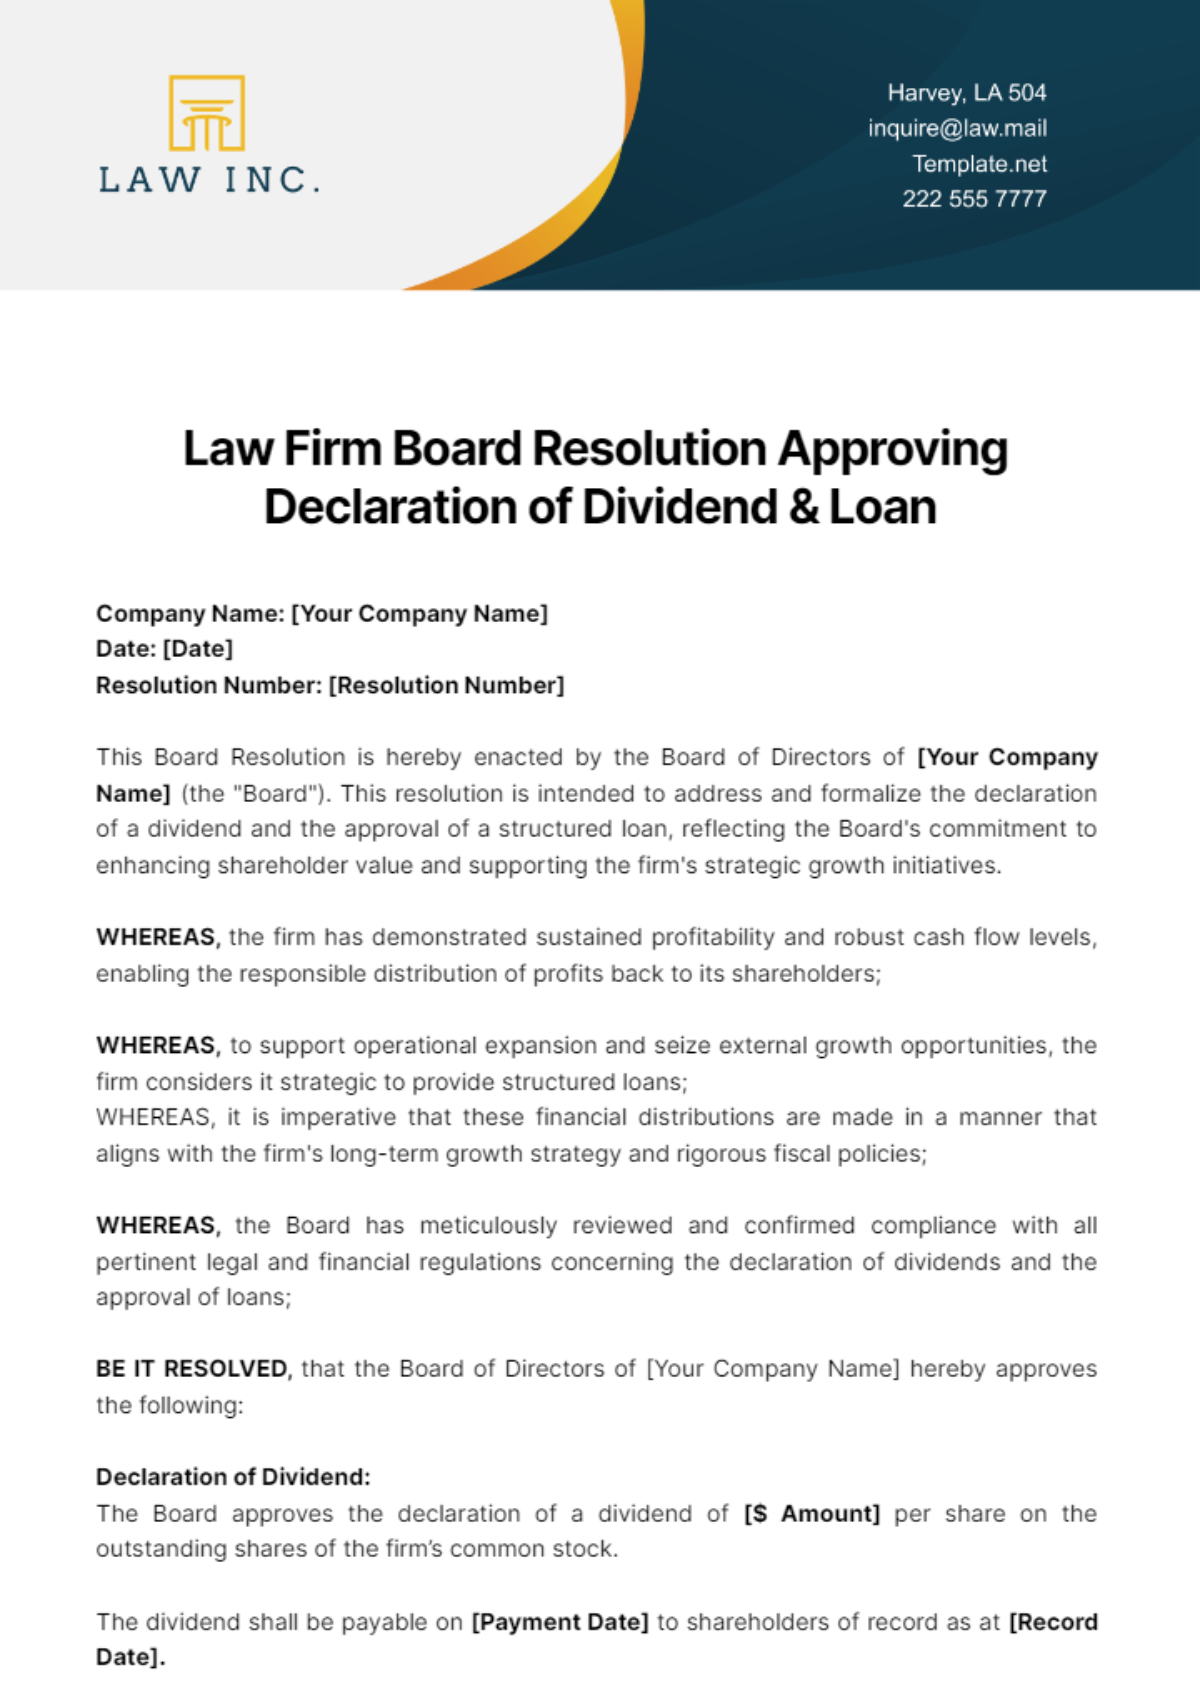 Law Firm Board Resolution Approving Declaration of Dividend & Loan Template